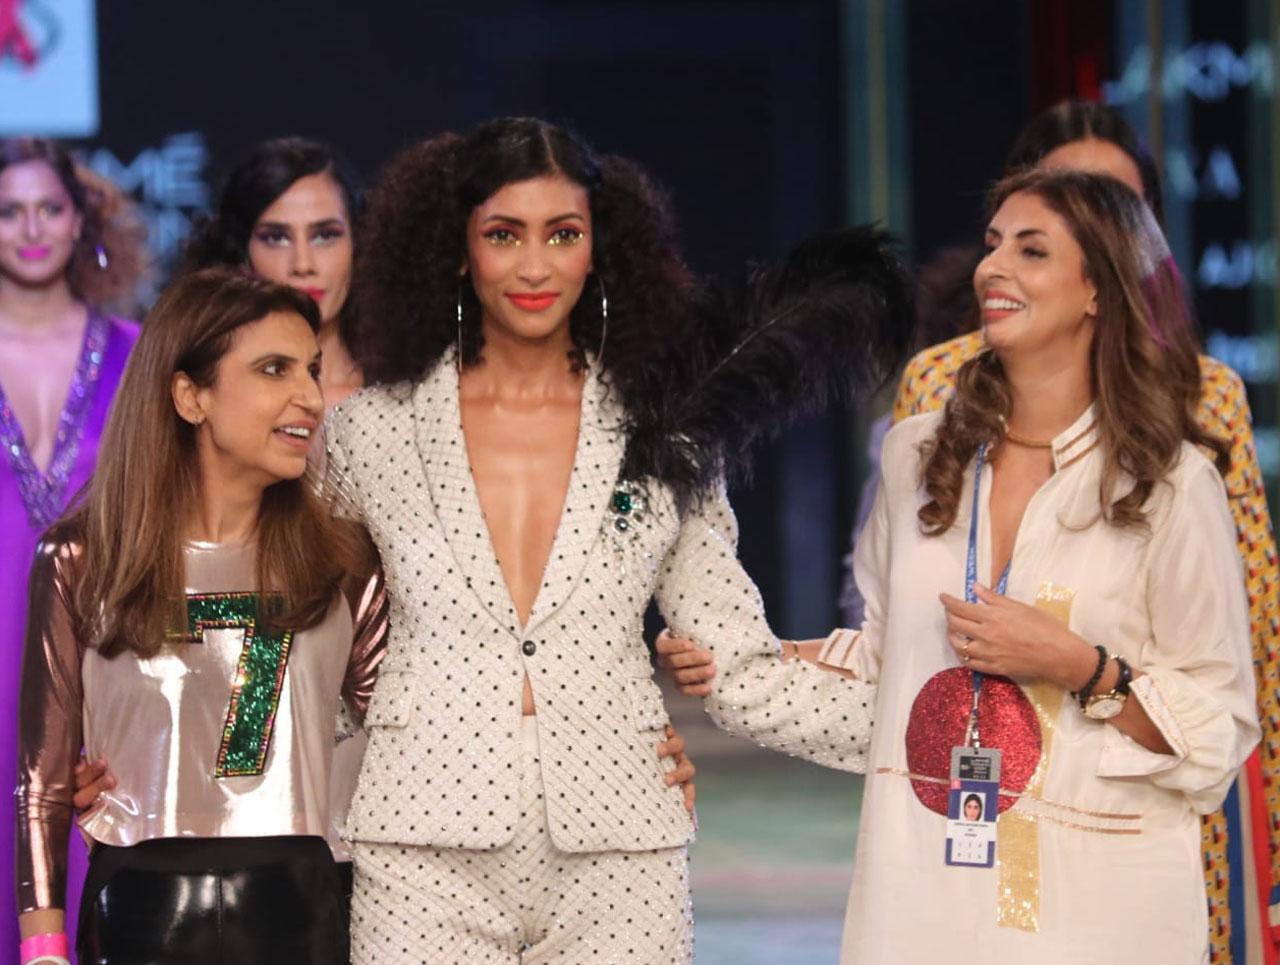 Shweta Bachchan Nanda even walked the ramp for Monisha Jaising and was captured in a candid, charming moment with the rest of the models. 